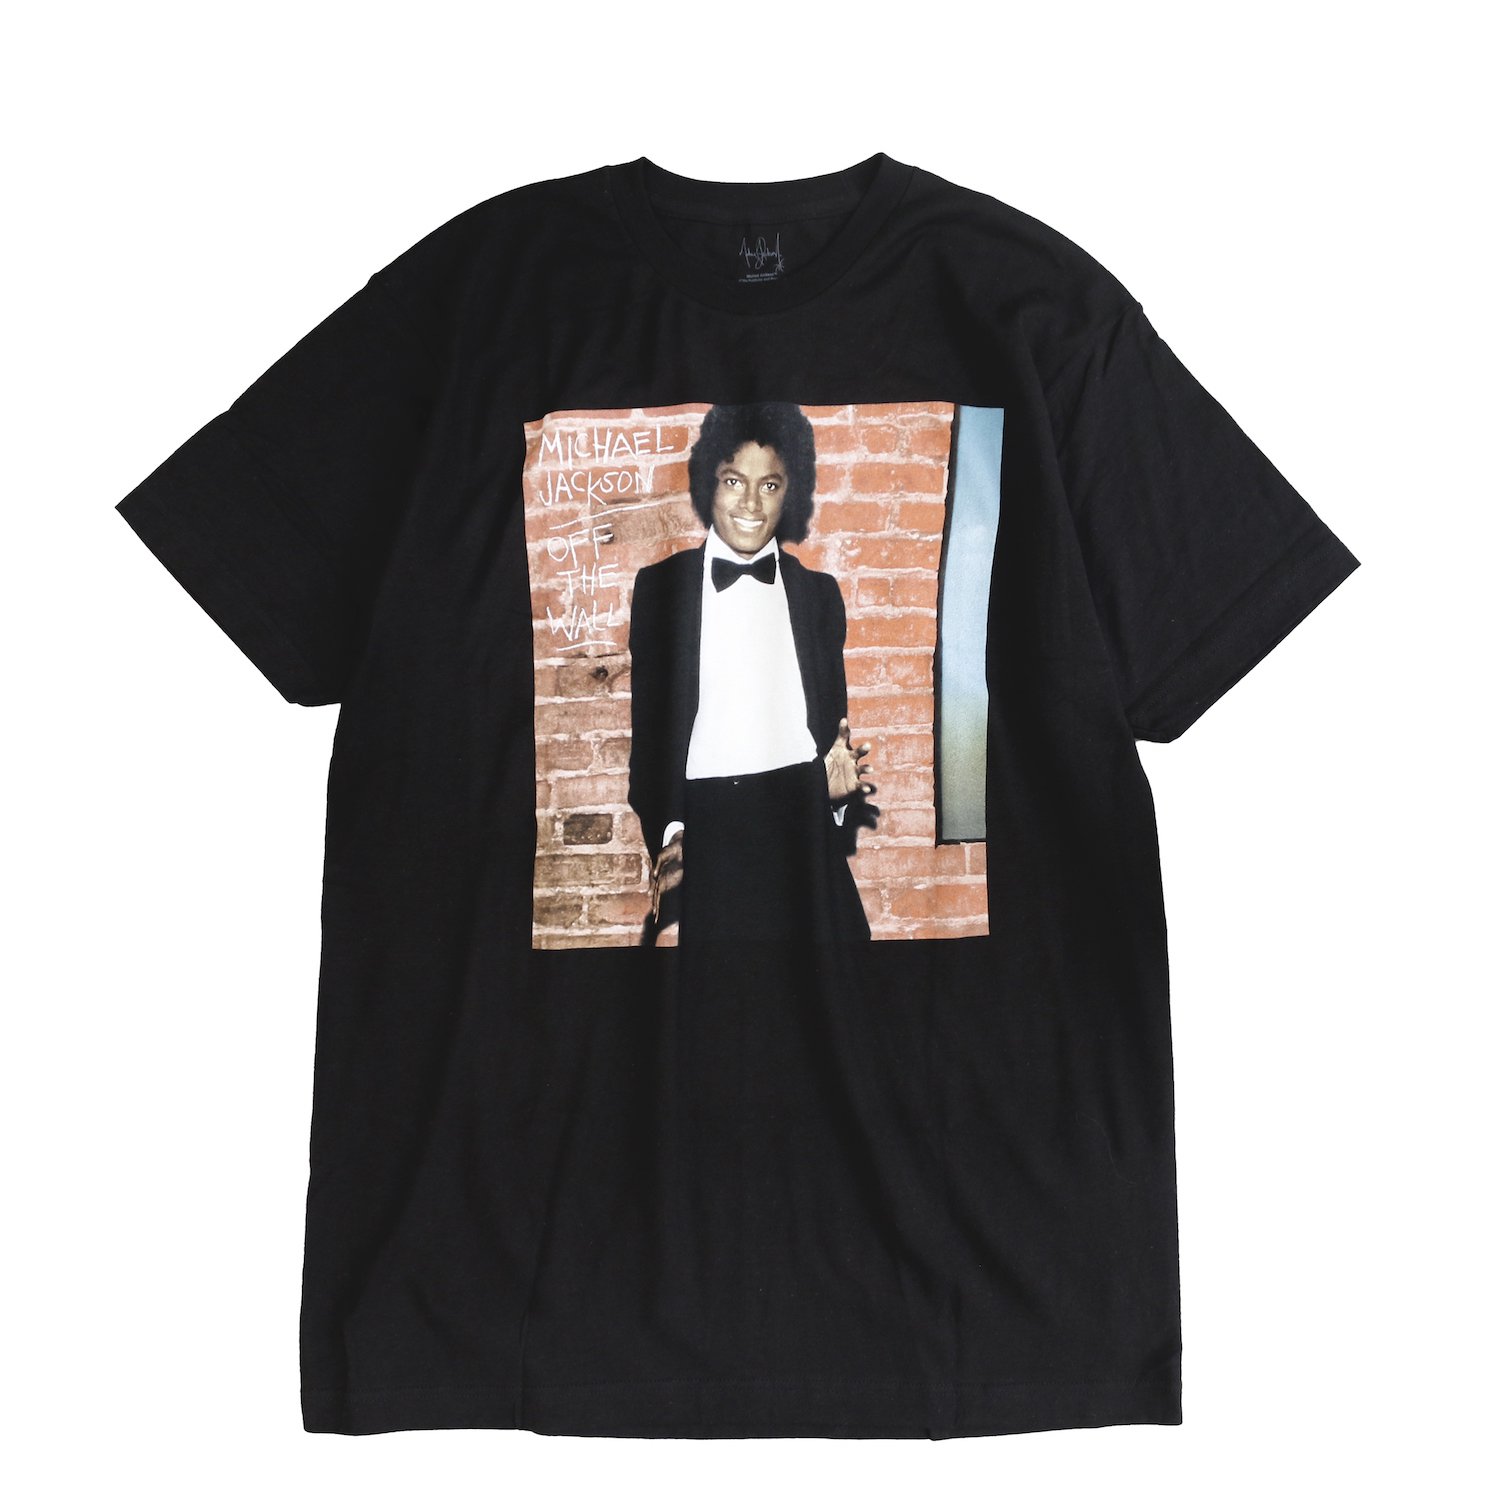 <img class='new_mark_img1' src='https://img.shop-pro.jp/img/new/icons20.gif' style='border:none;display:inline;margin:0px;padding:0px;width:auto;' /> Music Tee / S/S MICHAEL JACKSON 